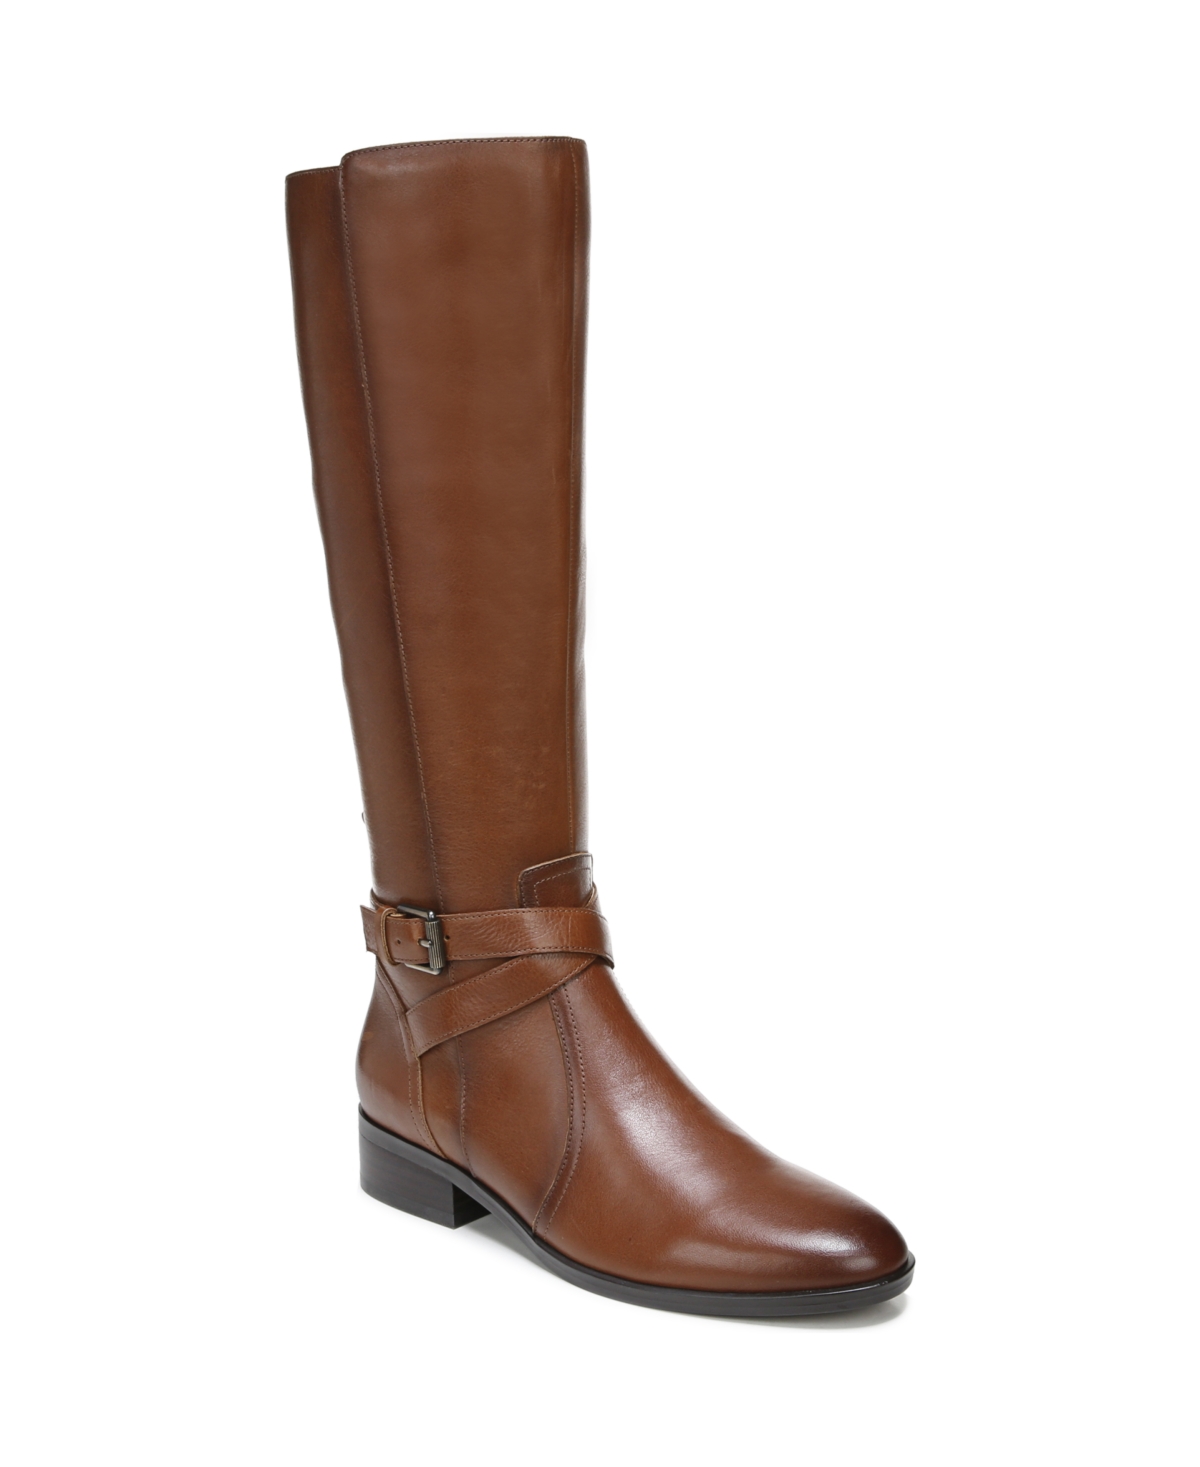 Rena Riding Boots - Cider Leather